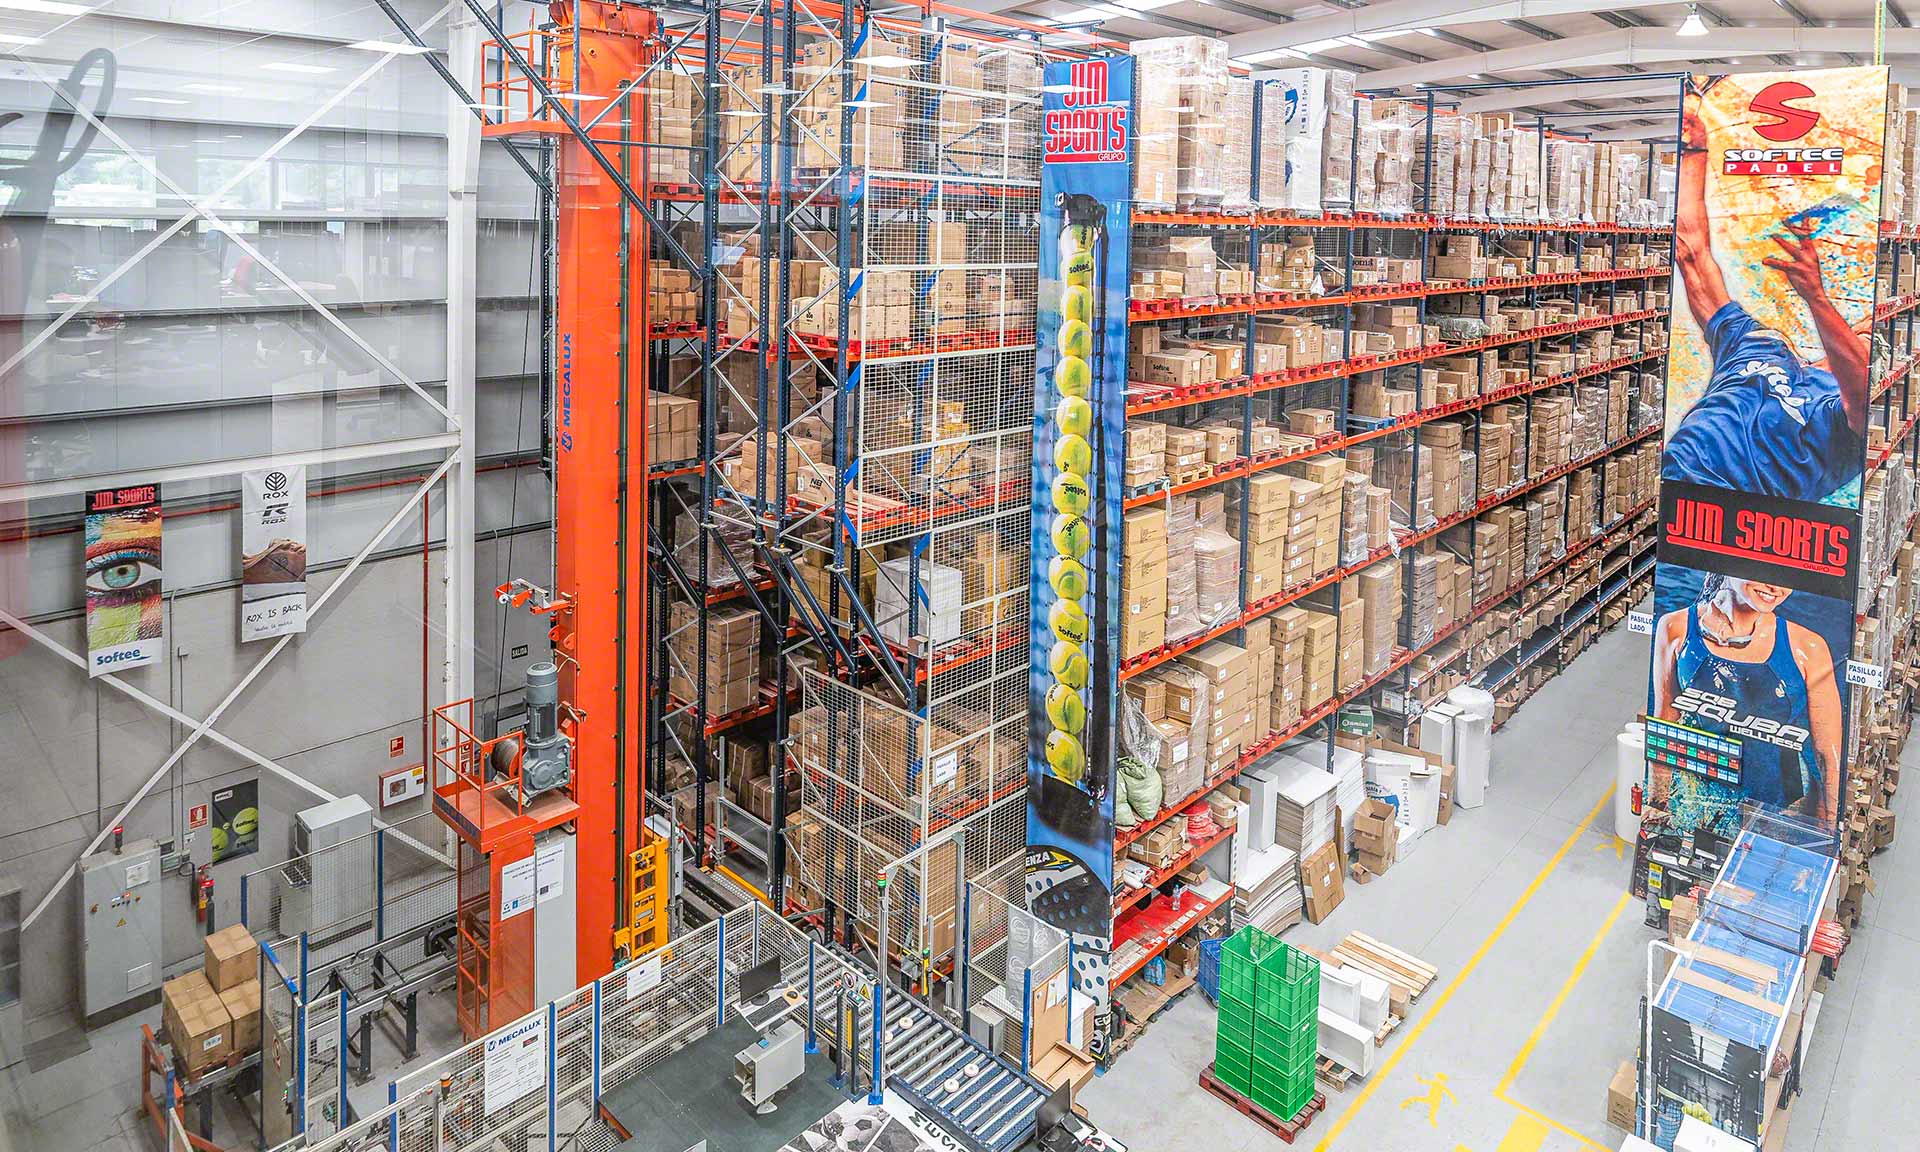 Jim Sports automates and digitalizes its sporting goods warehouse in Palas de Rei, Spain